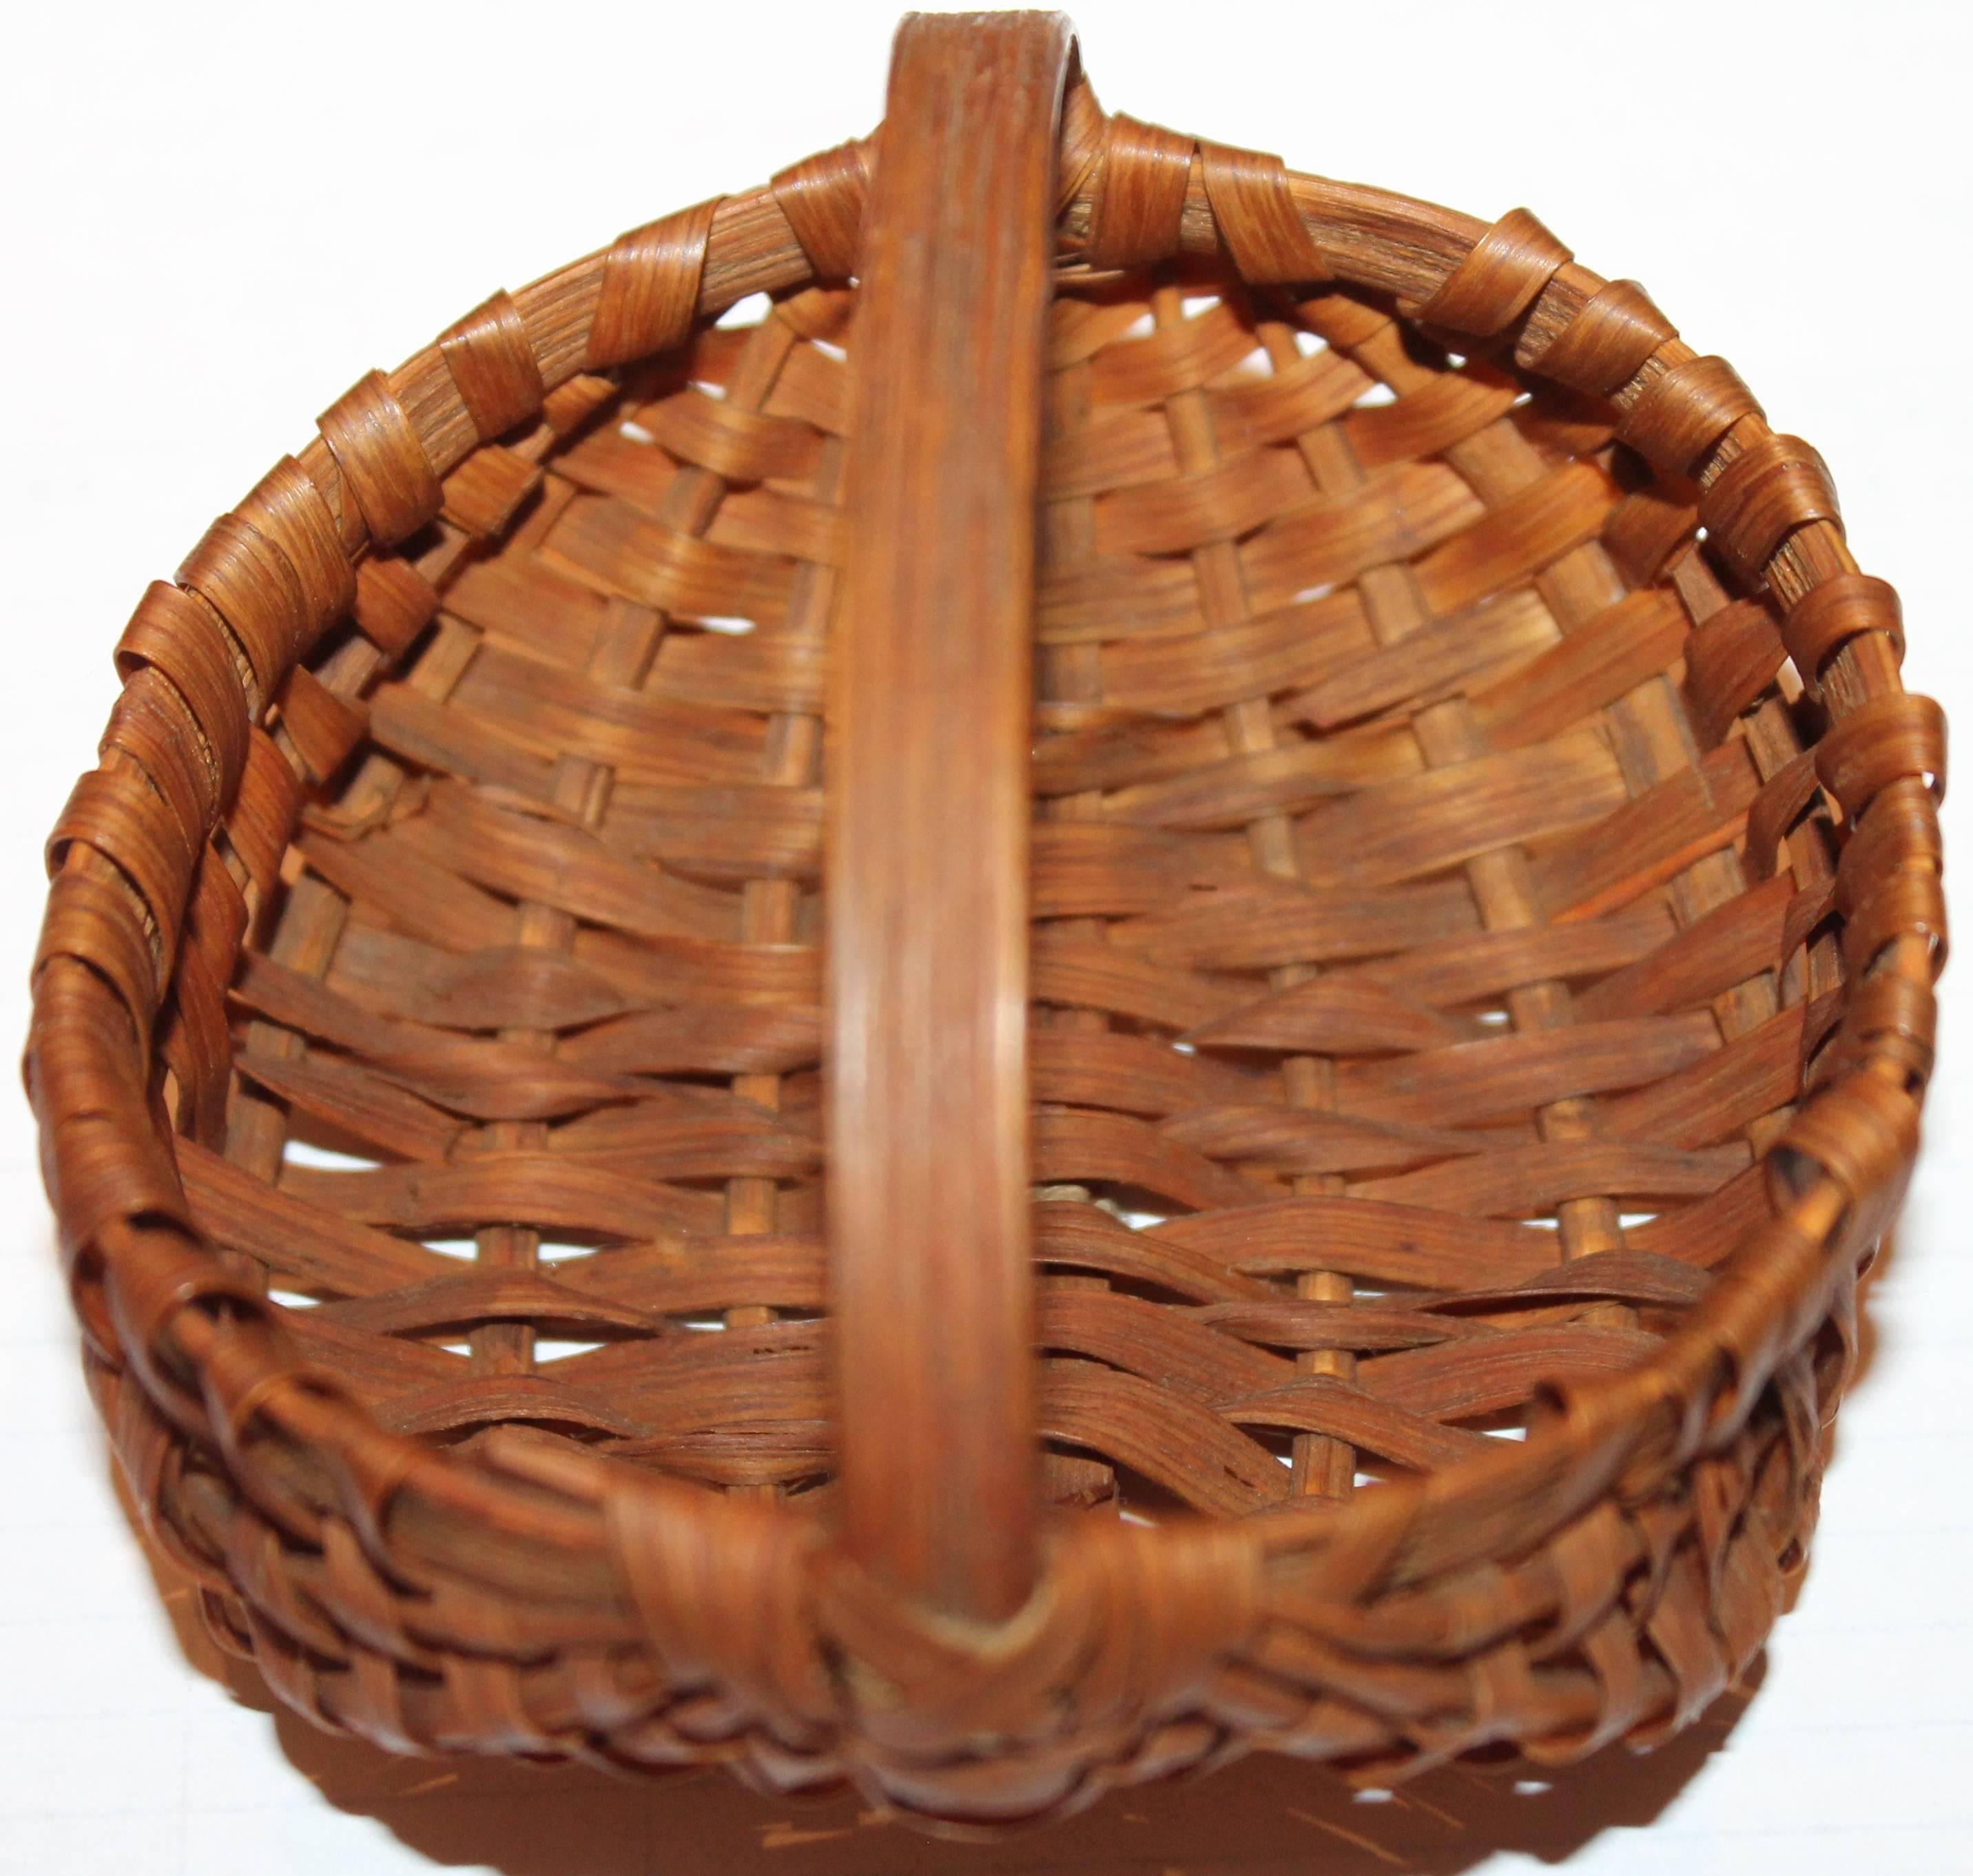 This early handmade basket is a miniature 19th century hiney basket from New England in great condition. This is a collector's dream.